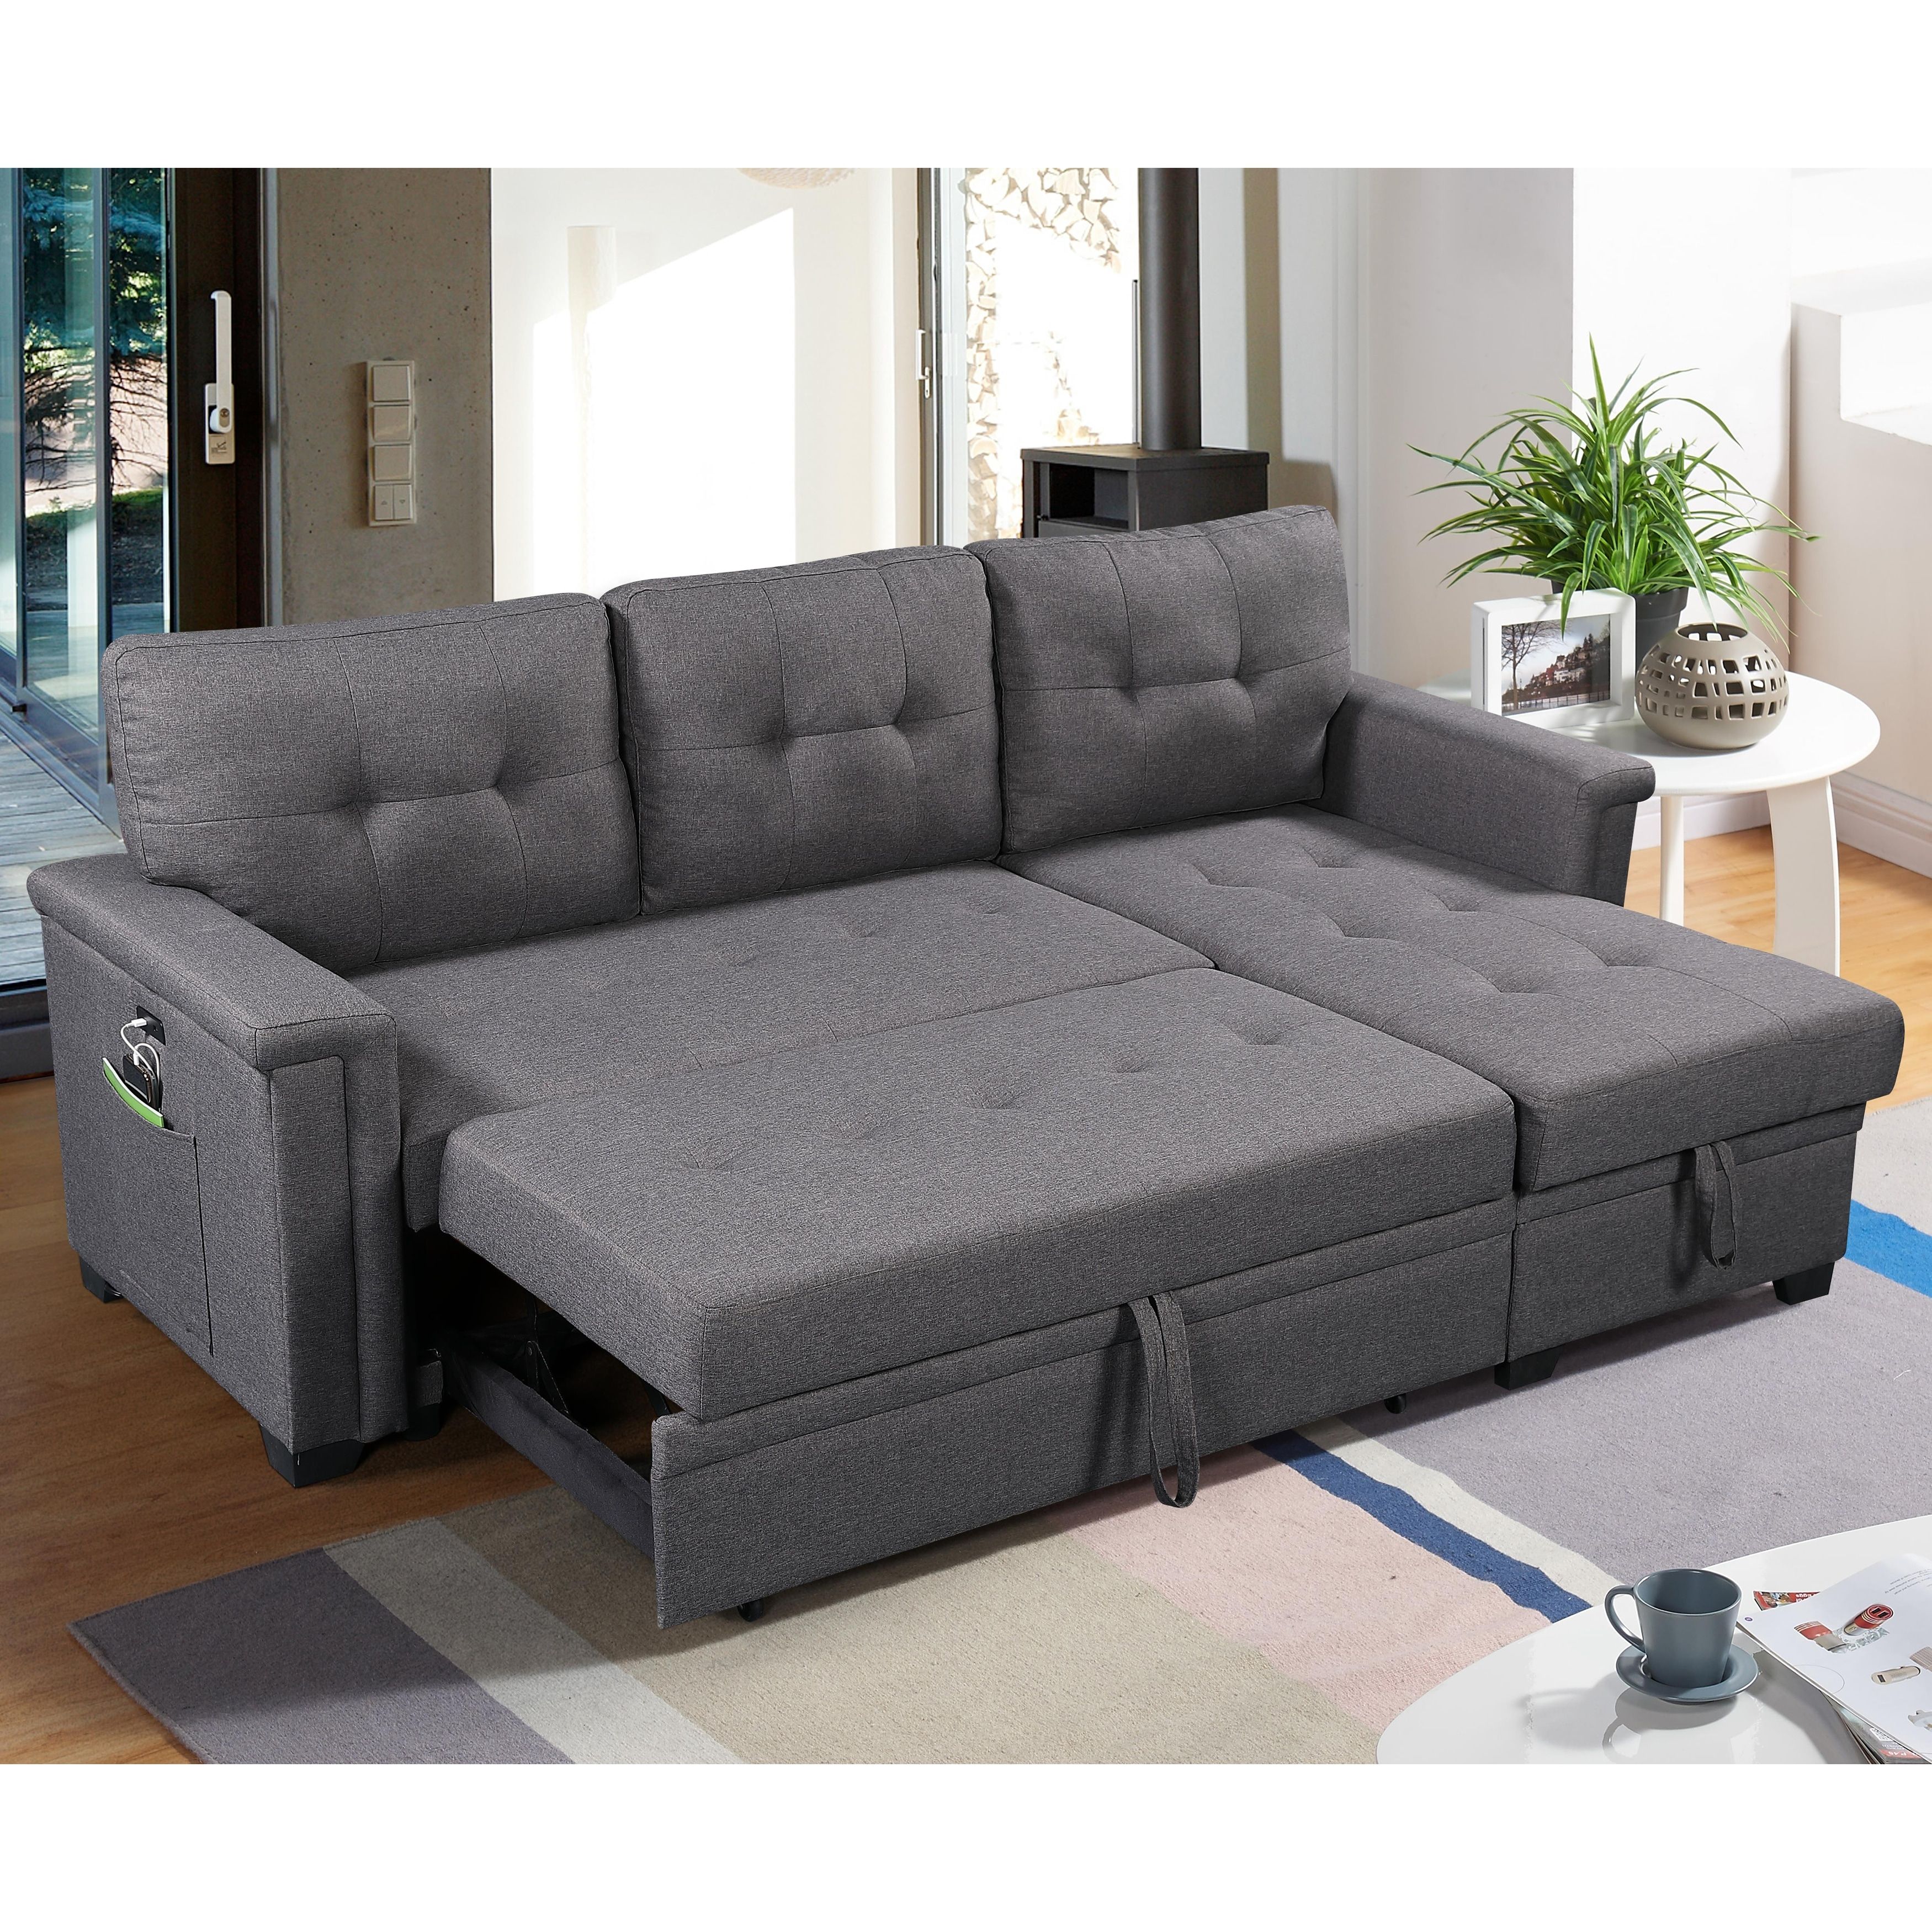 Ashlyn Reversible Sleeper Sofa With Storage Chaise – – 30144937 With Regard To Reversible Pull Out Sofa Couches (View 14 of 20)